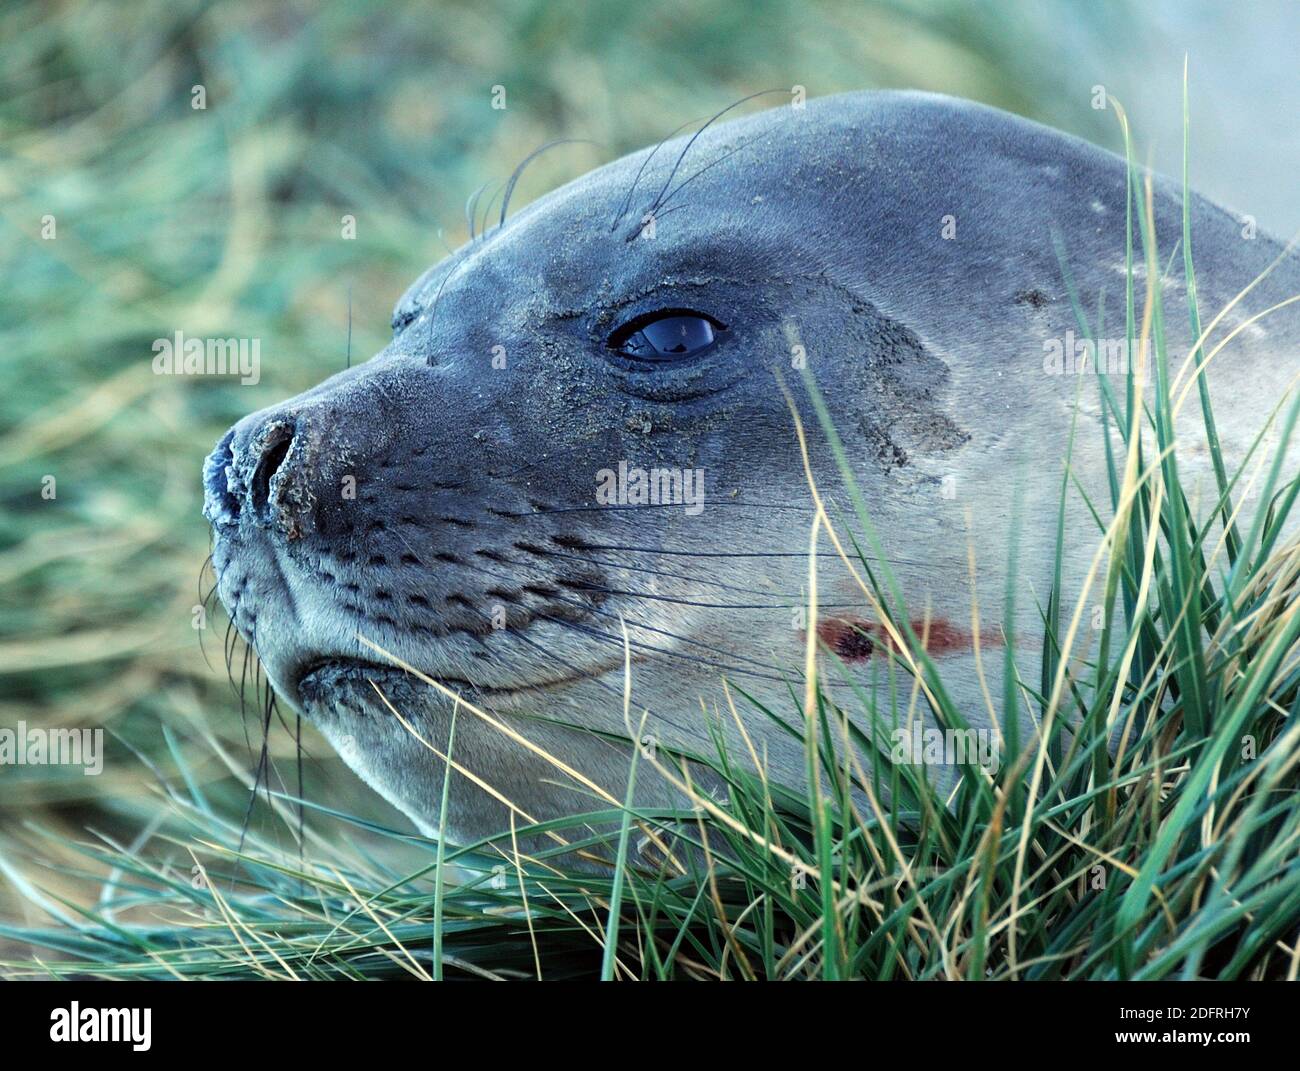 A seal rests among tussac grass (Poa flabellata) growing on a rocky hillside. Ocean Harbour,  South Georgia. Stock Photo